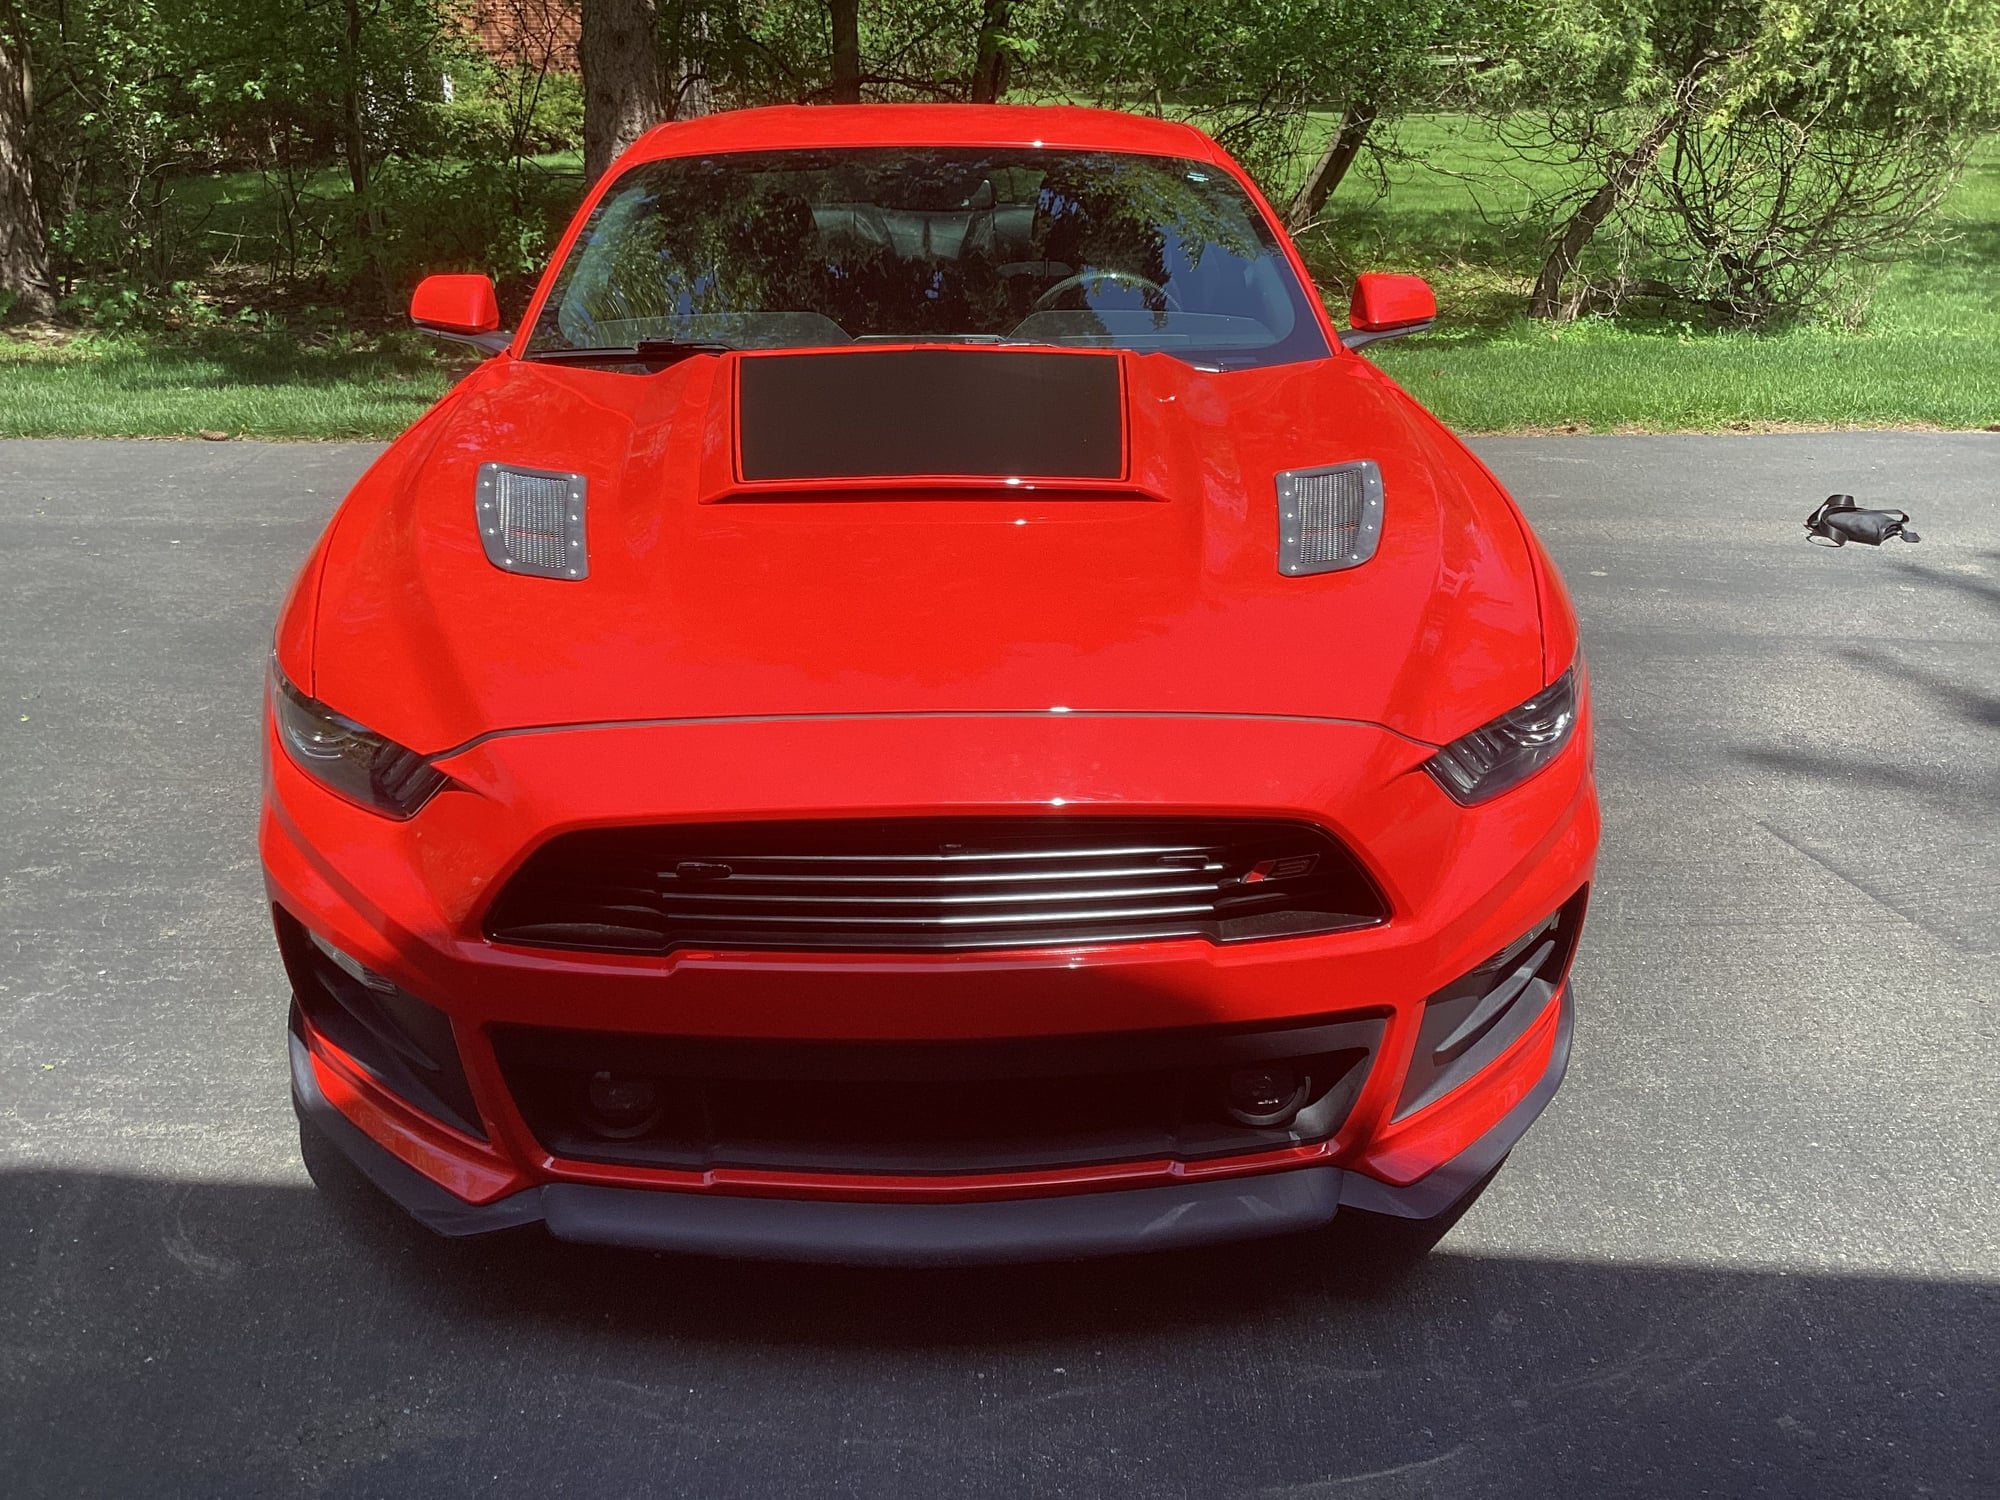 2015 Ford Mustang - Roush stage 3 plus - Used - VIN 1fa6p8cfxf5404543 - 40,000 Miles - 8 cyl - 2WD - Manual - Coupe - Red - Bloomfield Hills, MI 48301, United States